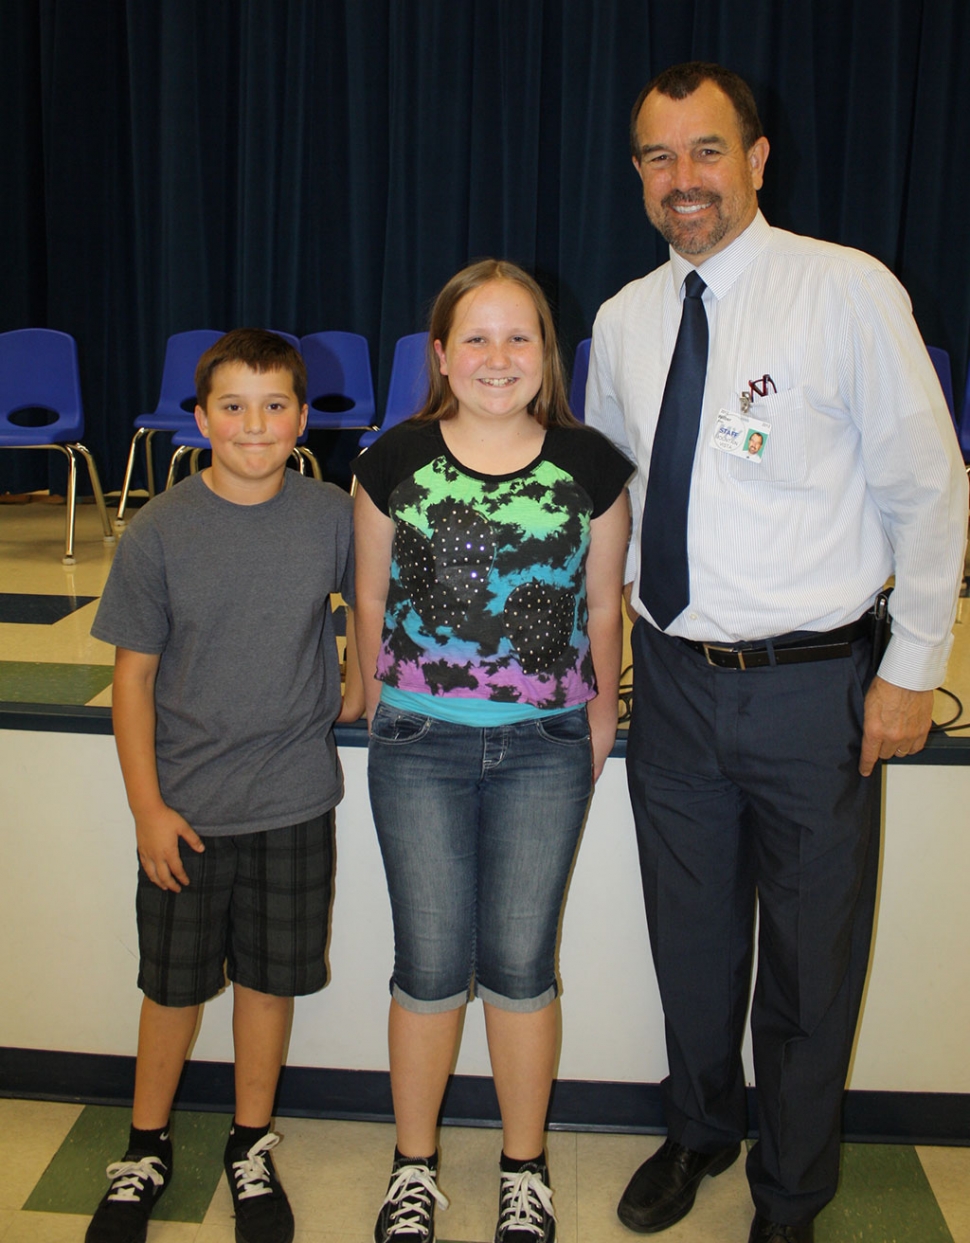 (l-r) Runner-up Phillip Cervantes, Champion Emma Myers, with MV Principal John Wilber. The audience was on the edge of their seats as 28 students competed last week to earn the title of Mountain Vista School Spelling Bee Champion.  Competition was intense between the 3rd, 4th, and 5th graders through five rounds. Finally, after eight rounds Emma Myers won with the championship word “full-fledged.”  Phillip Cervantes is runner-up.  The next stage in the competition is the Ventura County Bee held March 7 at California State Channel Islands University.